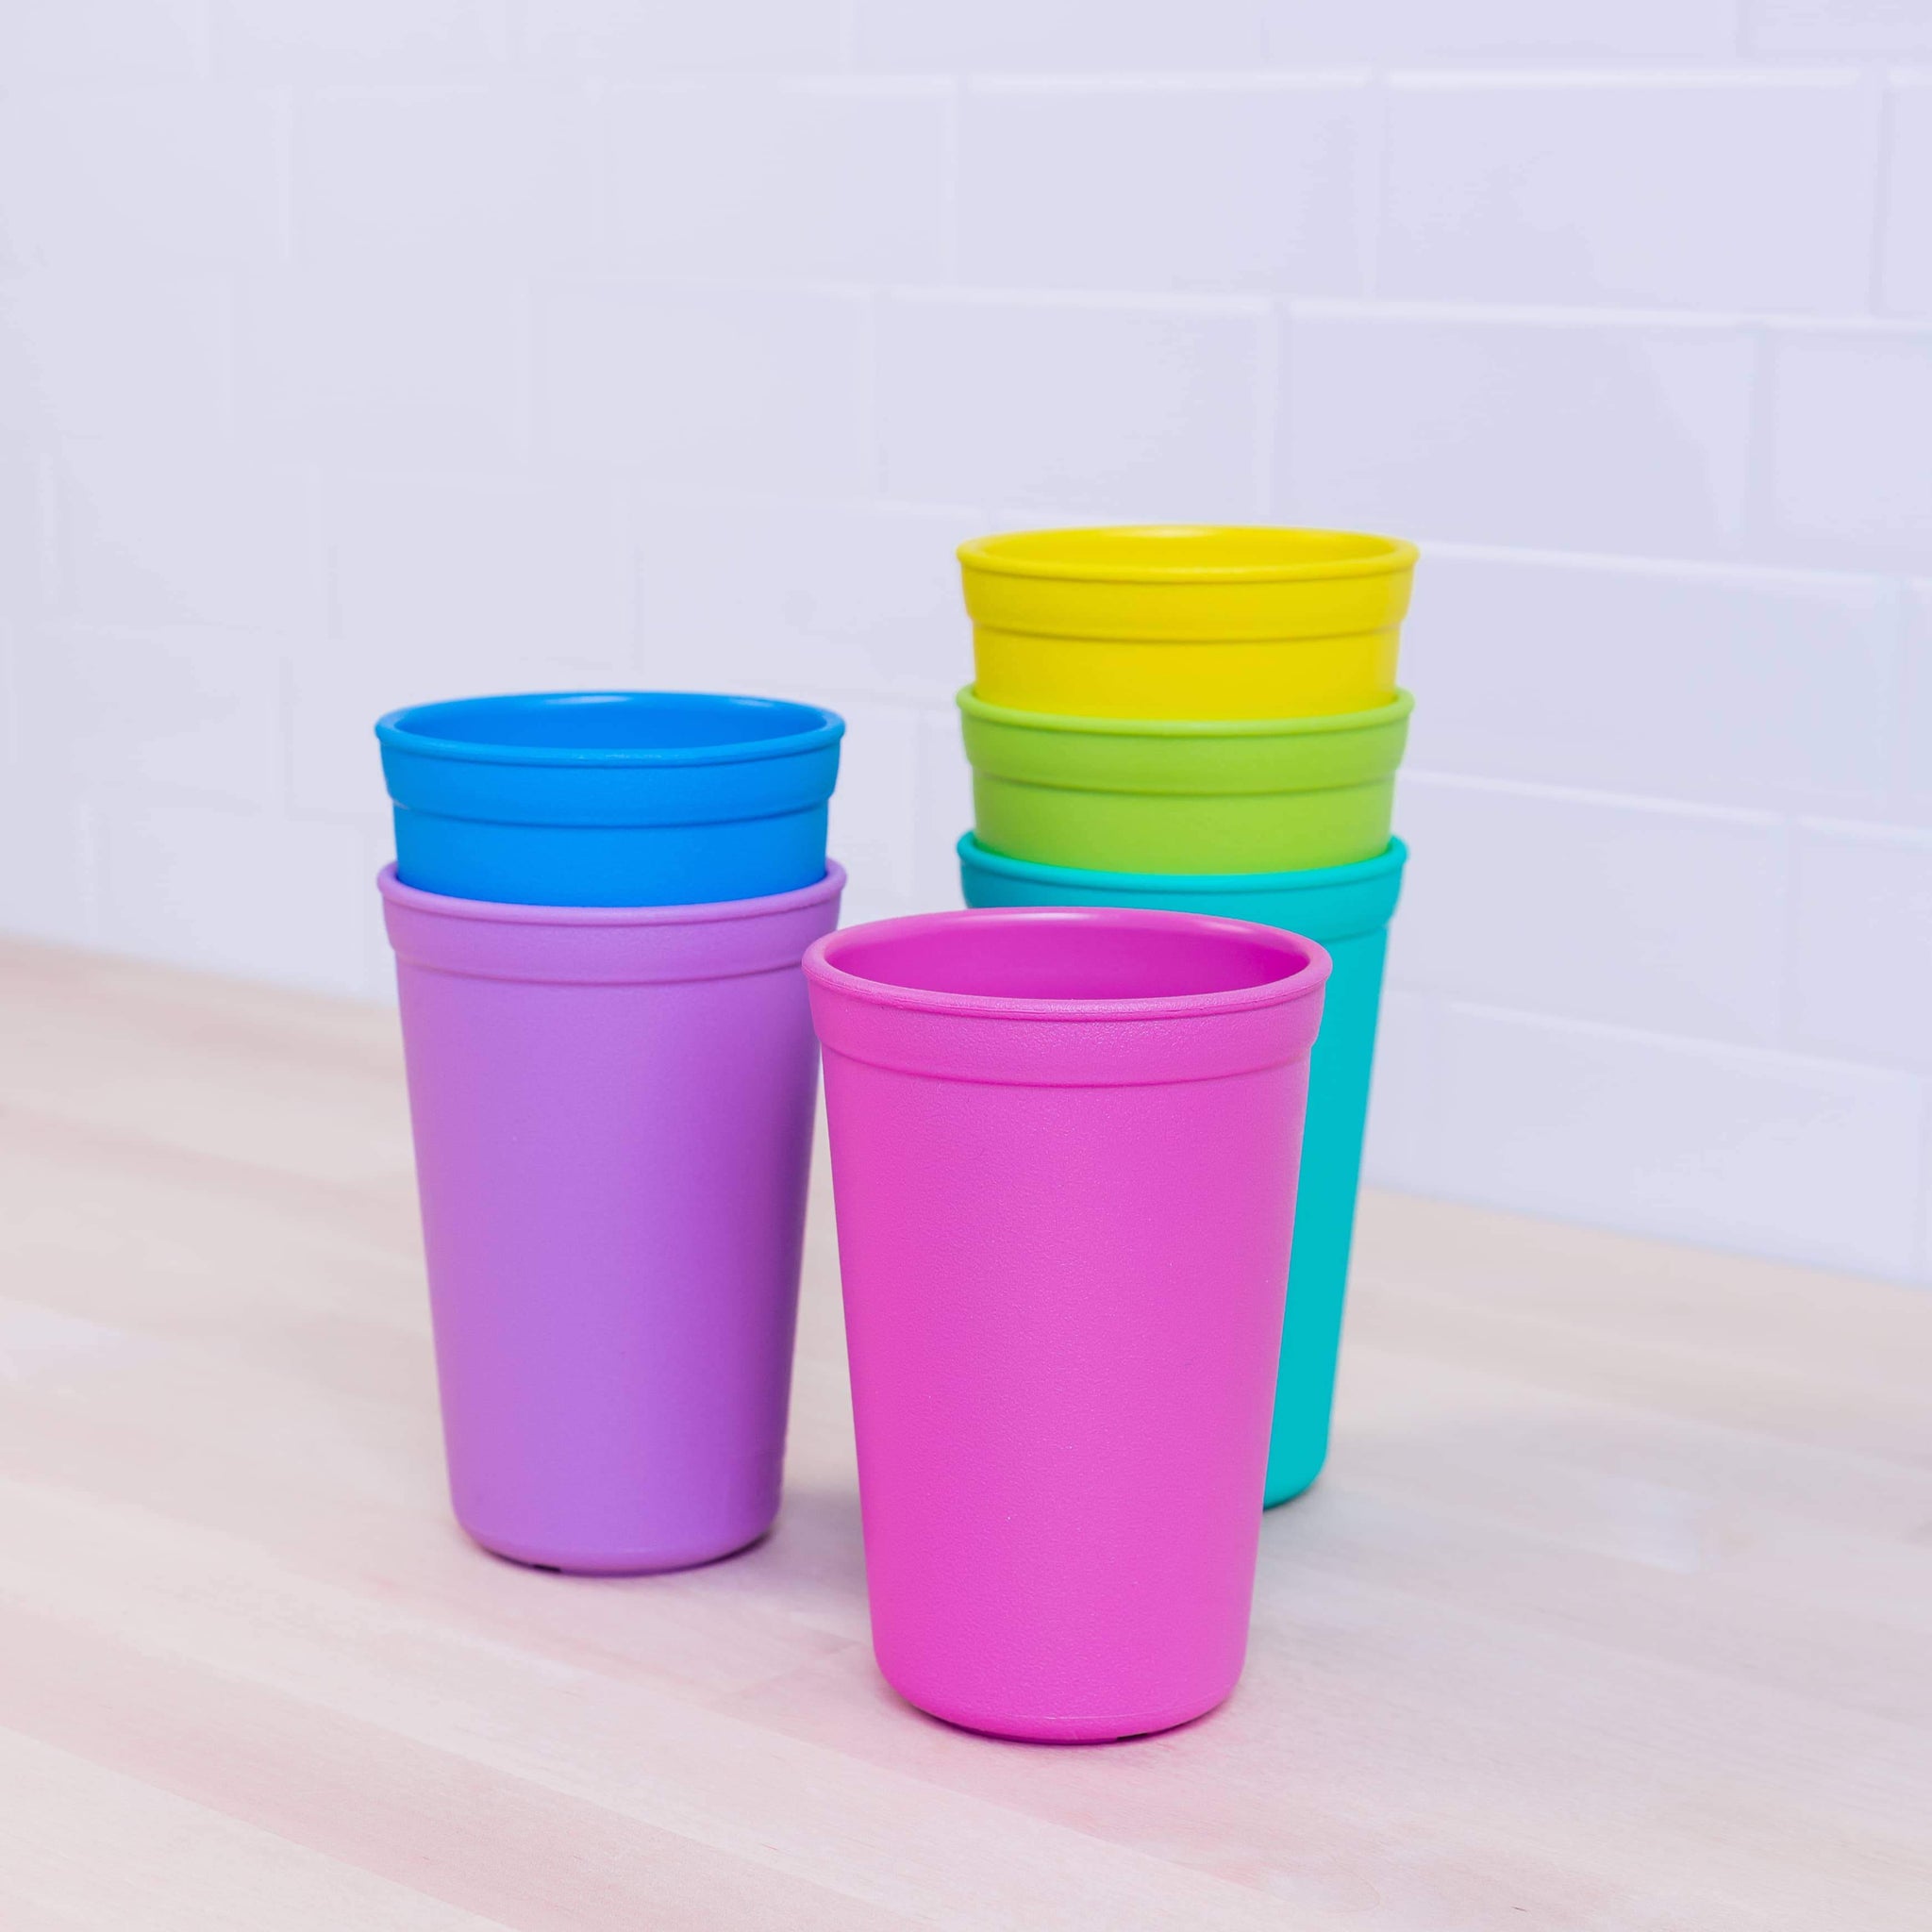 Re-Play Toddler Tableware - Cups - Crunch Natural Parenting is where to buy